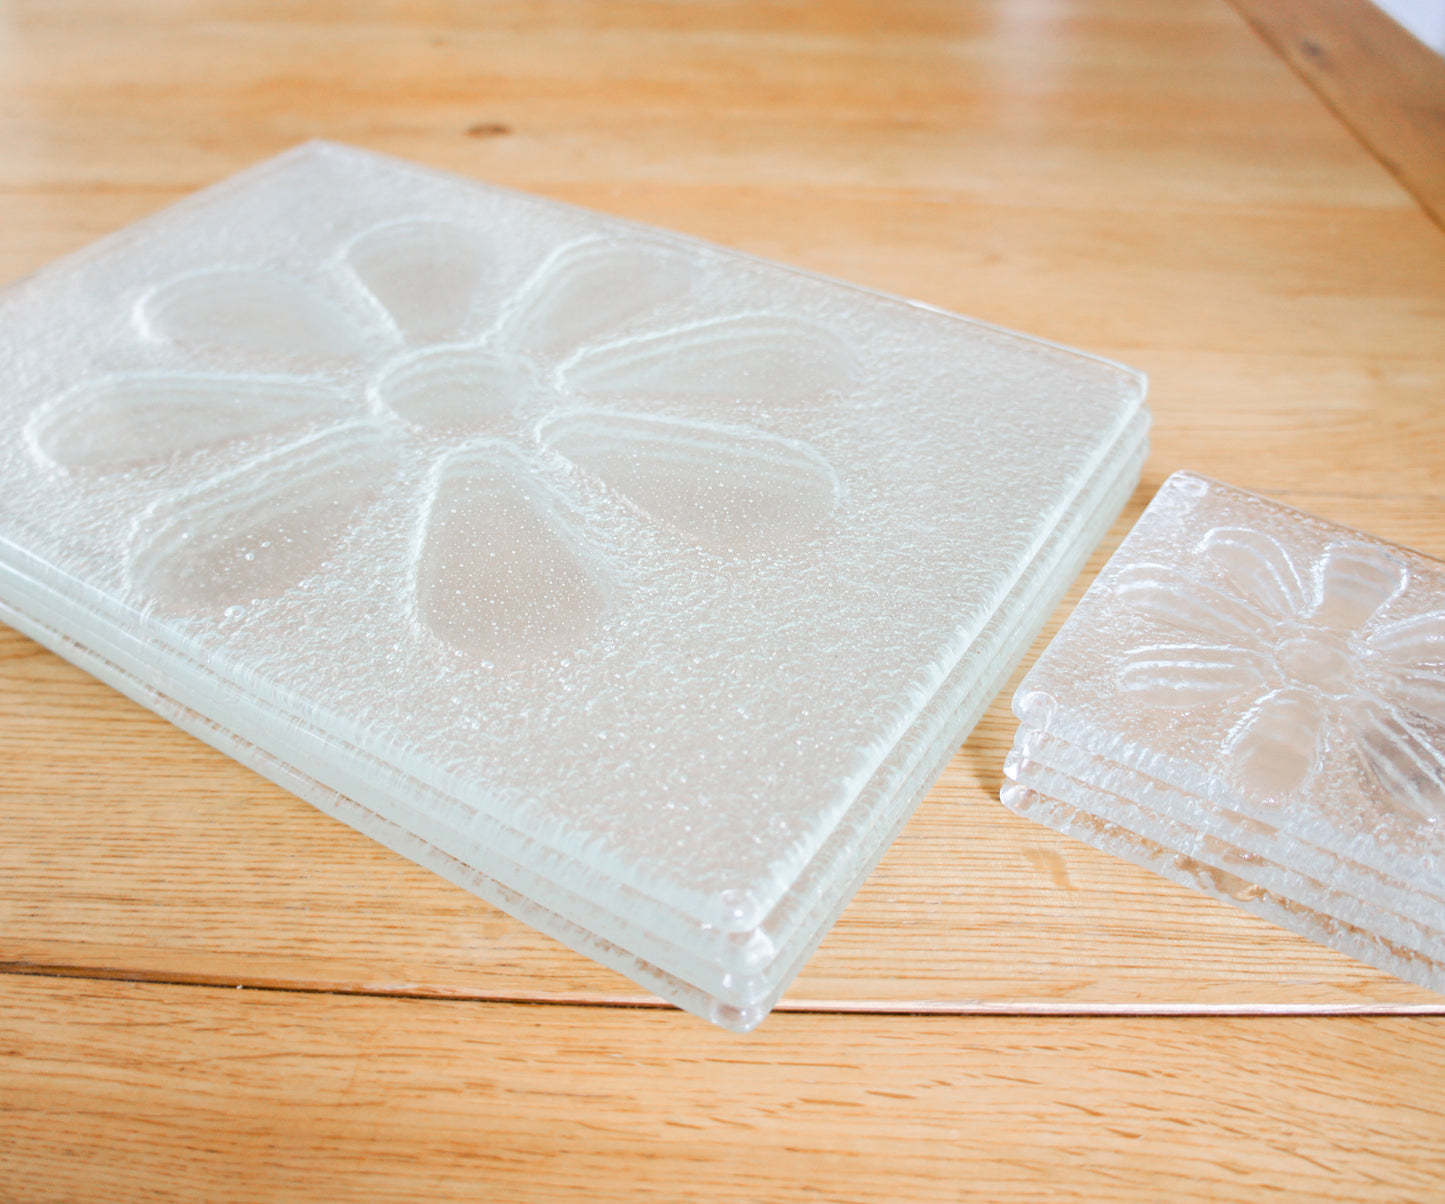 Set of Daisy Placemat + matching coaster - 30x20cm(11 3/4 x 8 1/4") and 10cm(4")